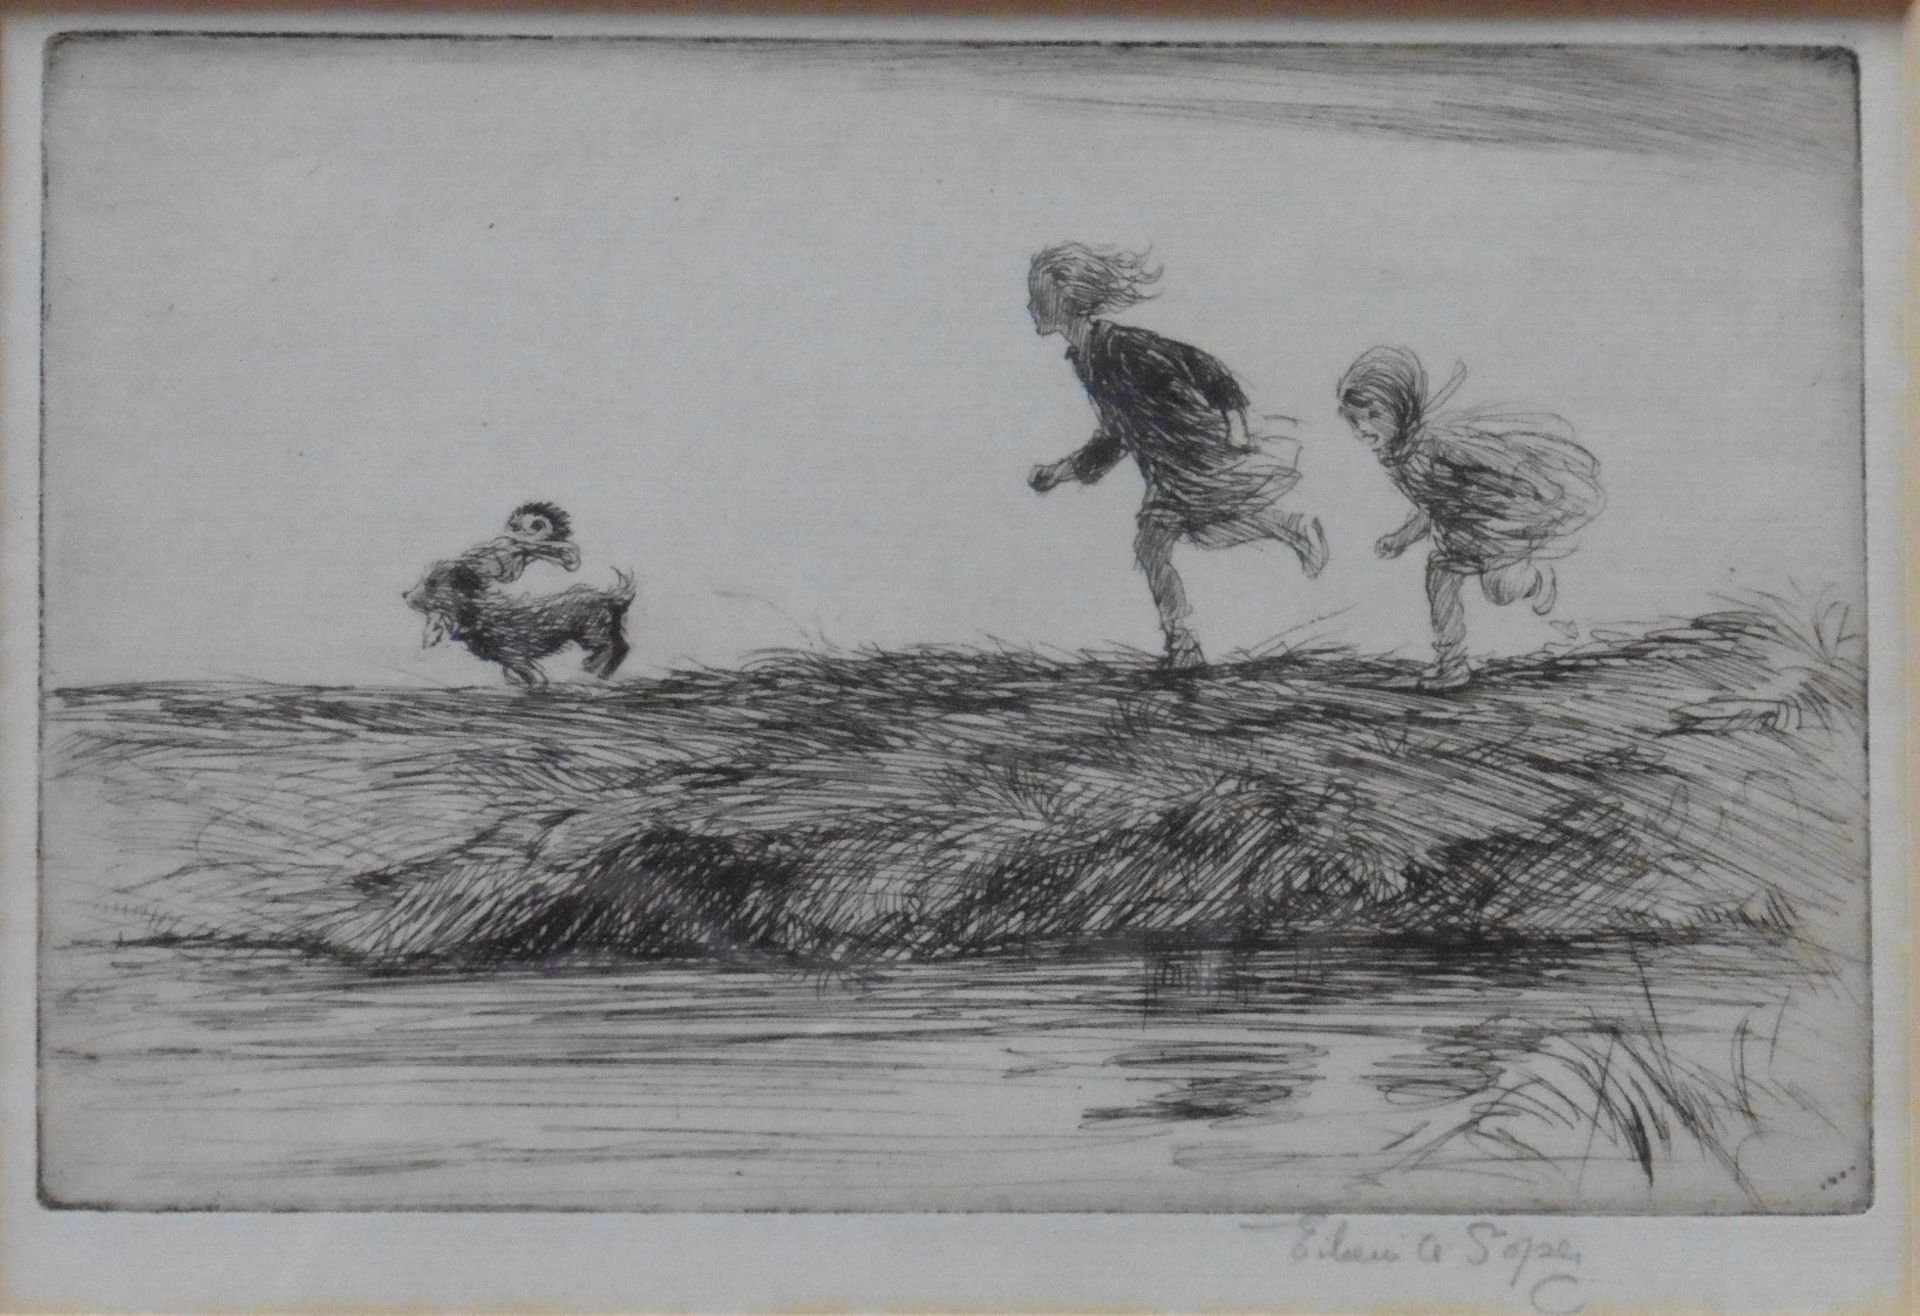 Eileen Soper RMS SWLA (1905-1990) signed Etching “The chase”